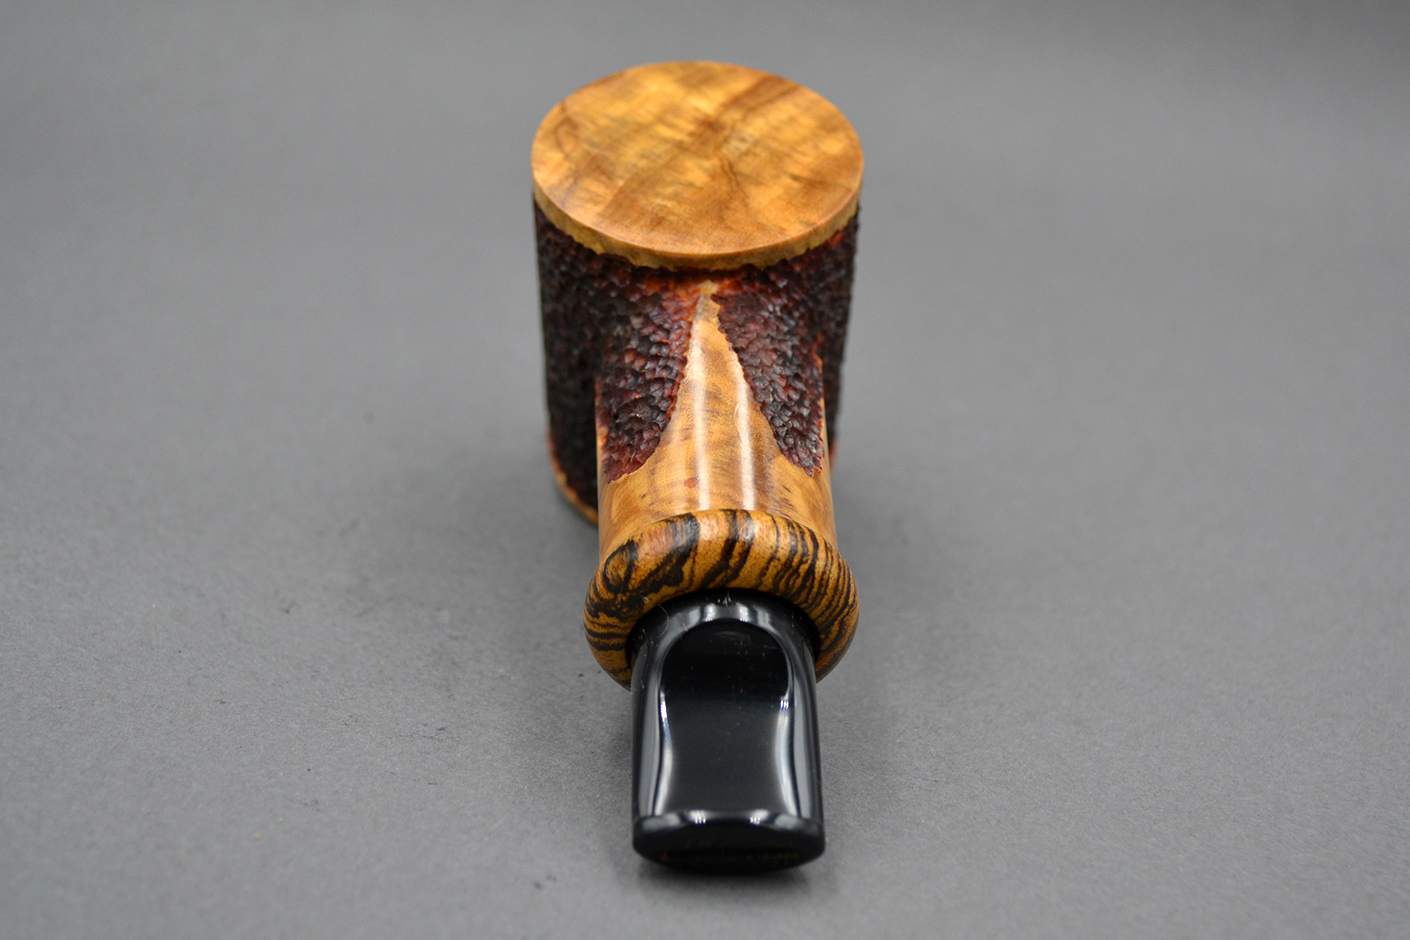 Queen 21132 – Handmade Olivewood Tobacco Pipe